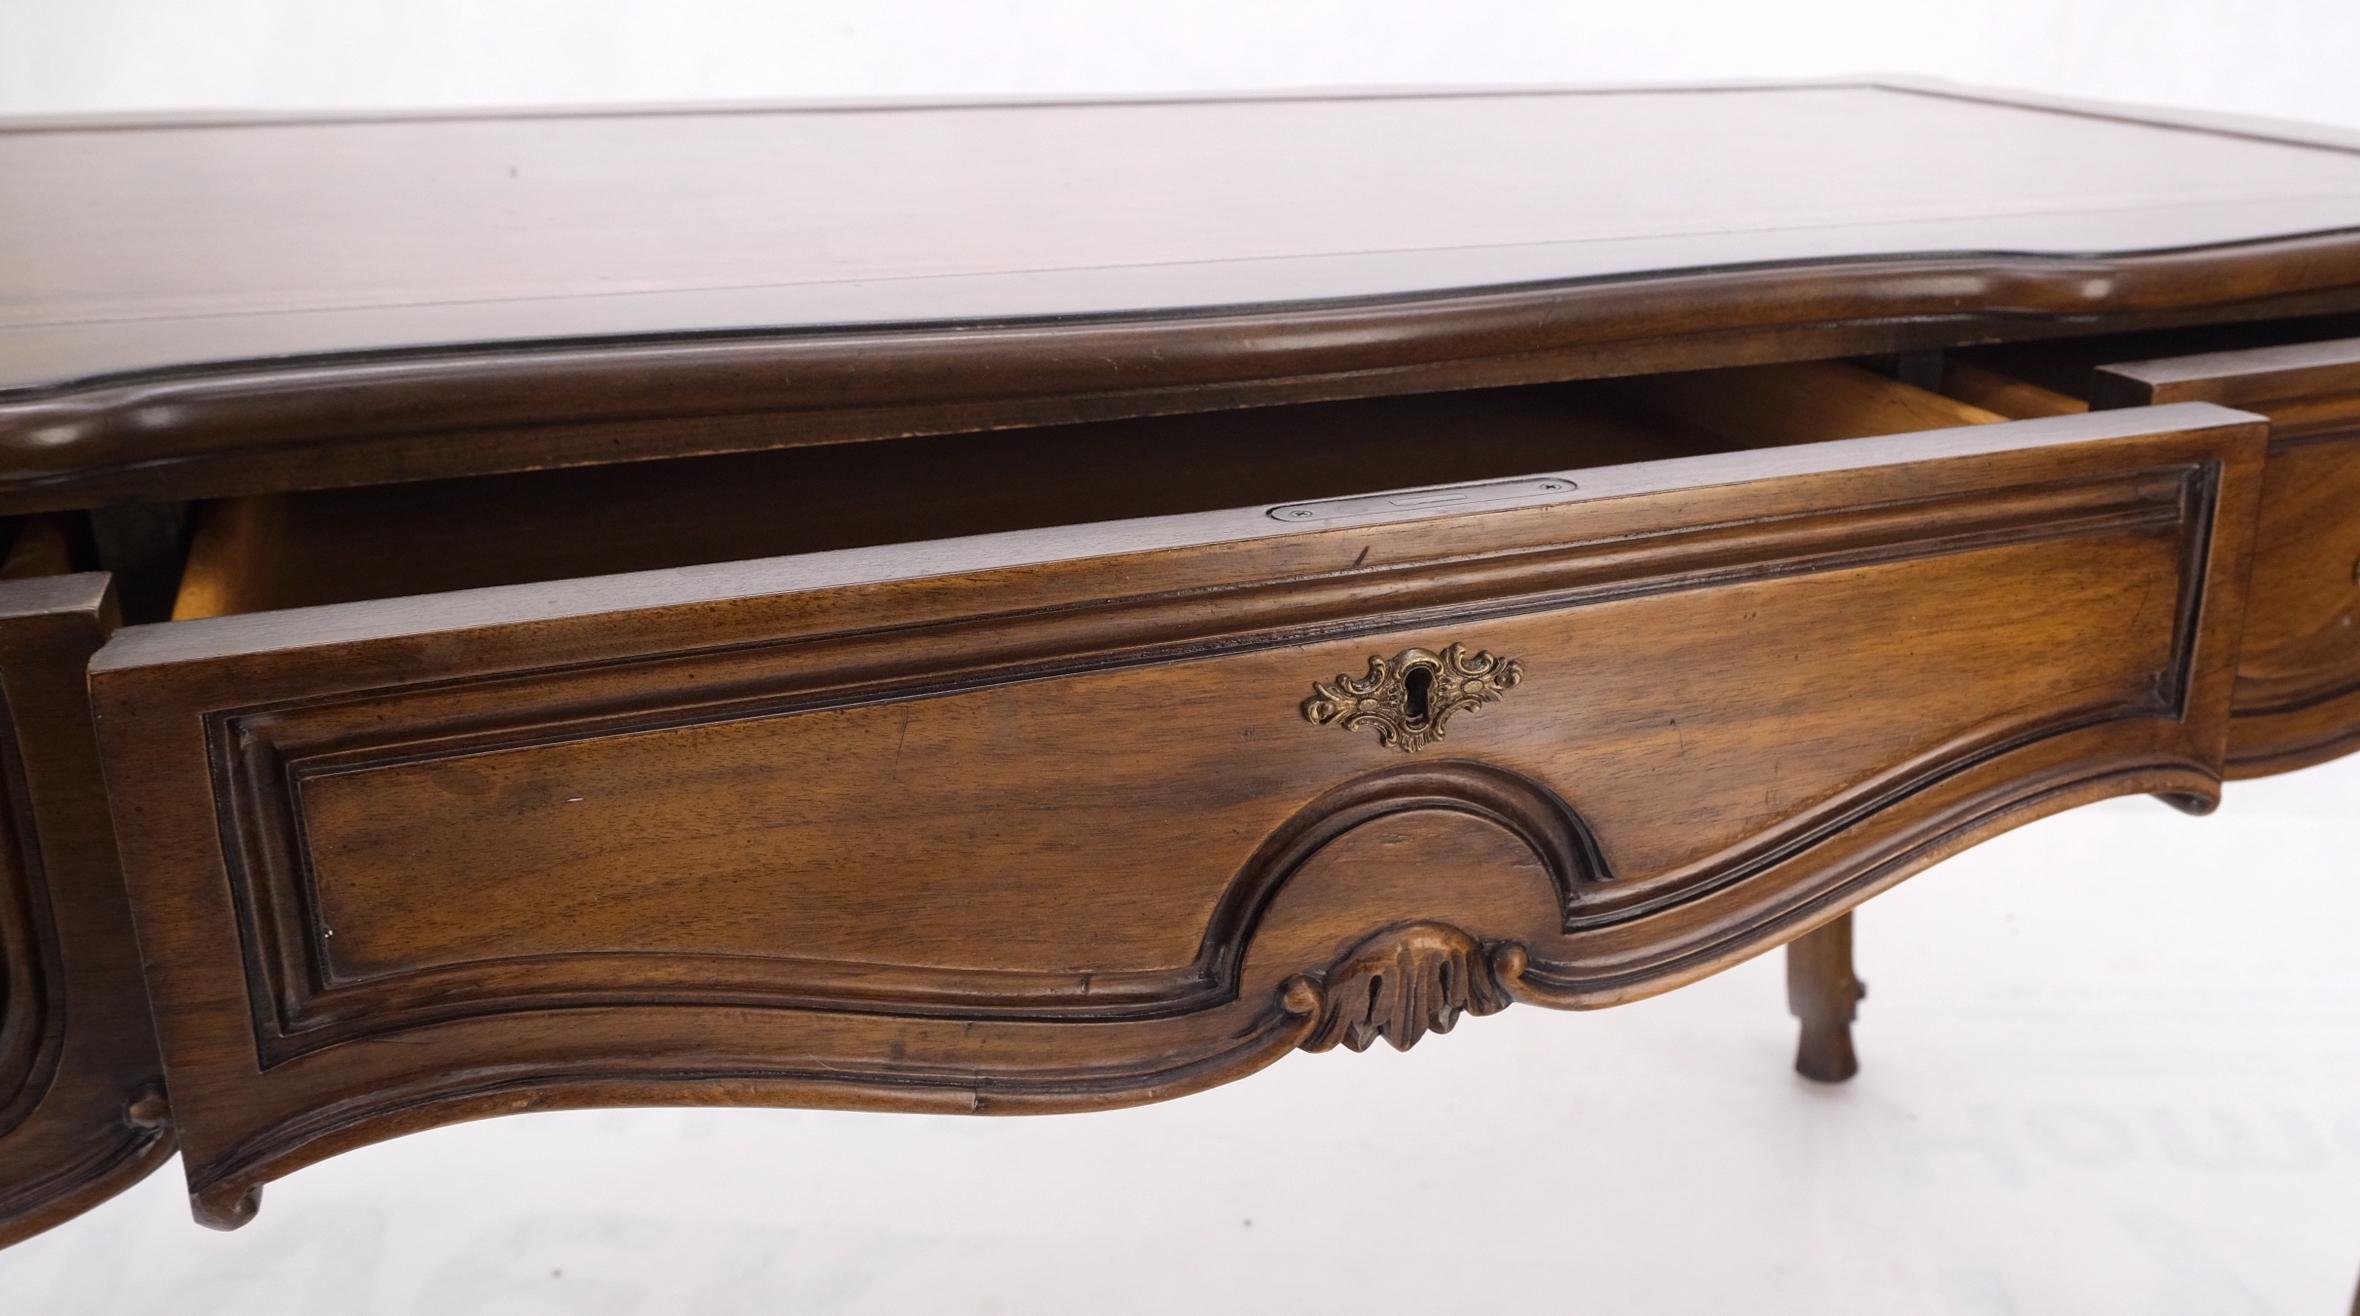 Carved walnut embossed leather top country 3 drawer french desk.